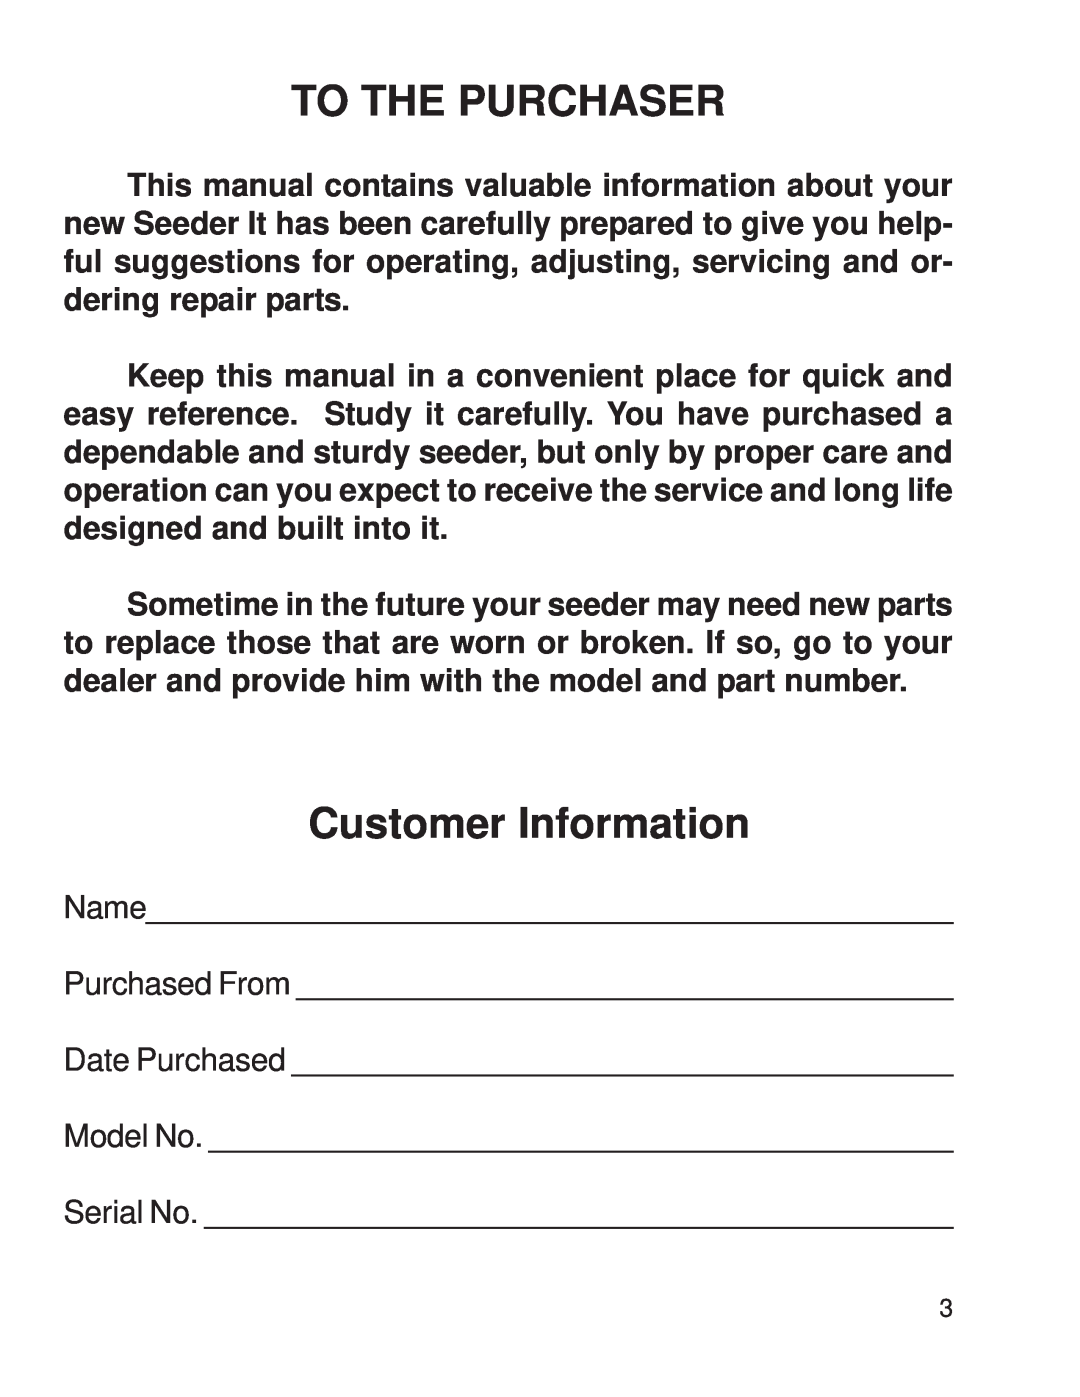 King Kutter none manual To The Purchaser, Customer Information 